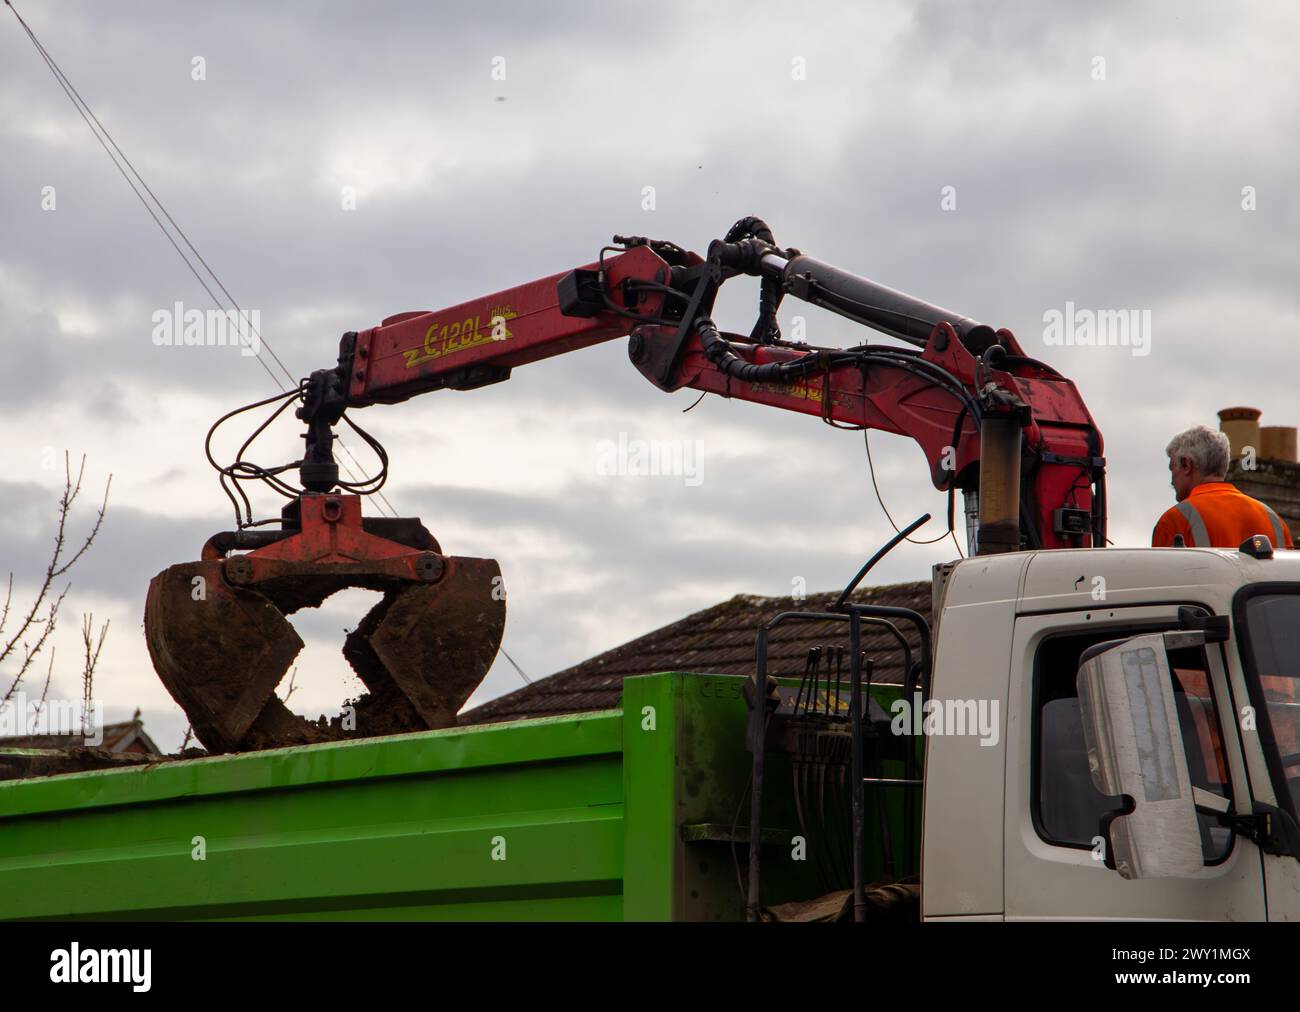 Rubble grab lorry removing stone and soil with a clamshell bucket on a crane. Stock Photo